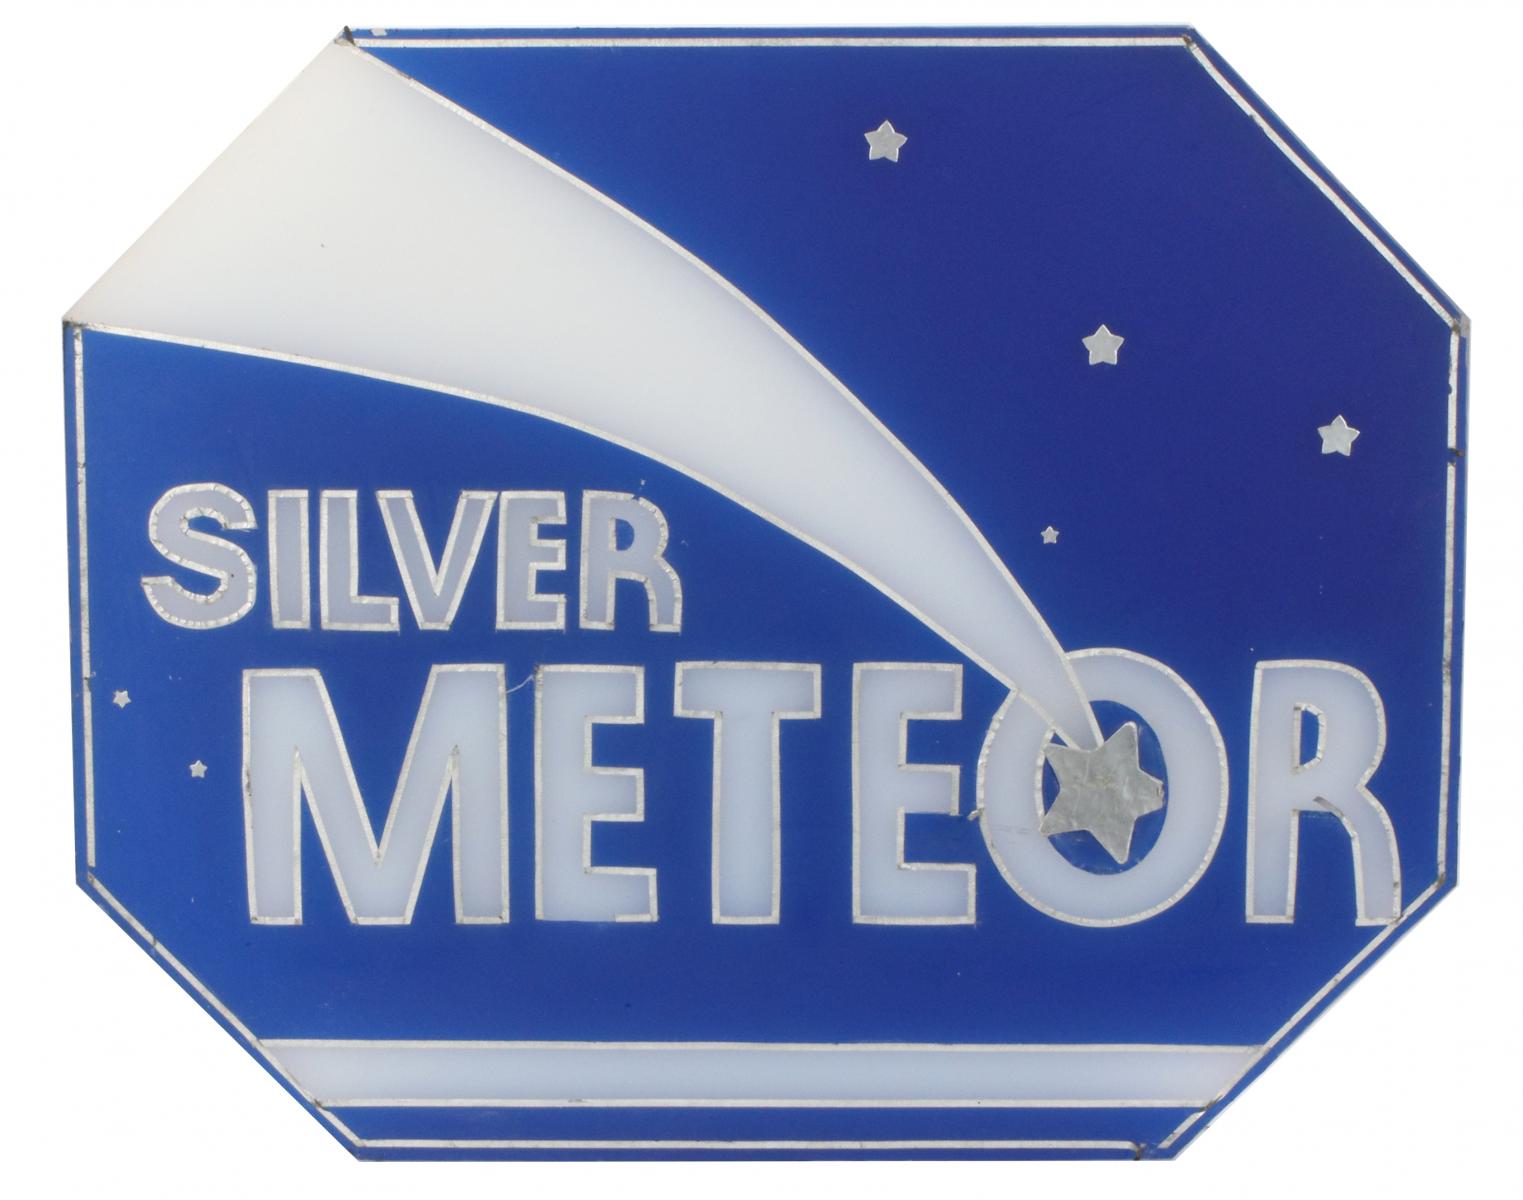 AN ACRYLIC DRUMHEAD SIGN INSERT FOR THE 'SILVER METEOR'